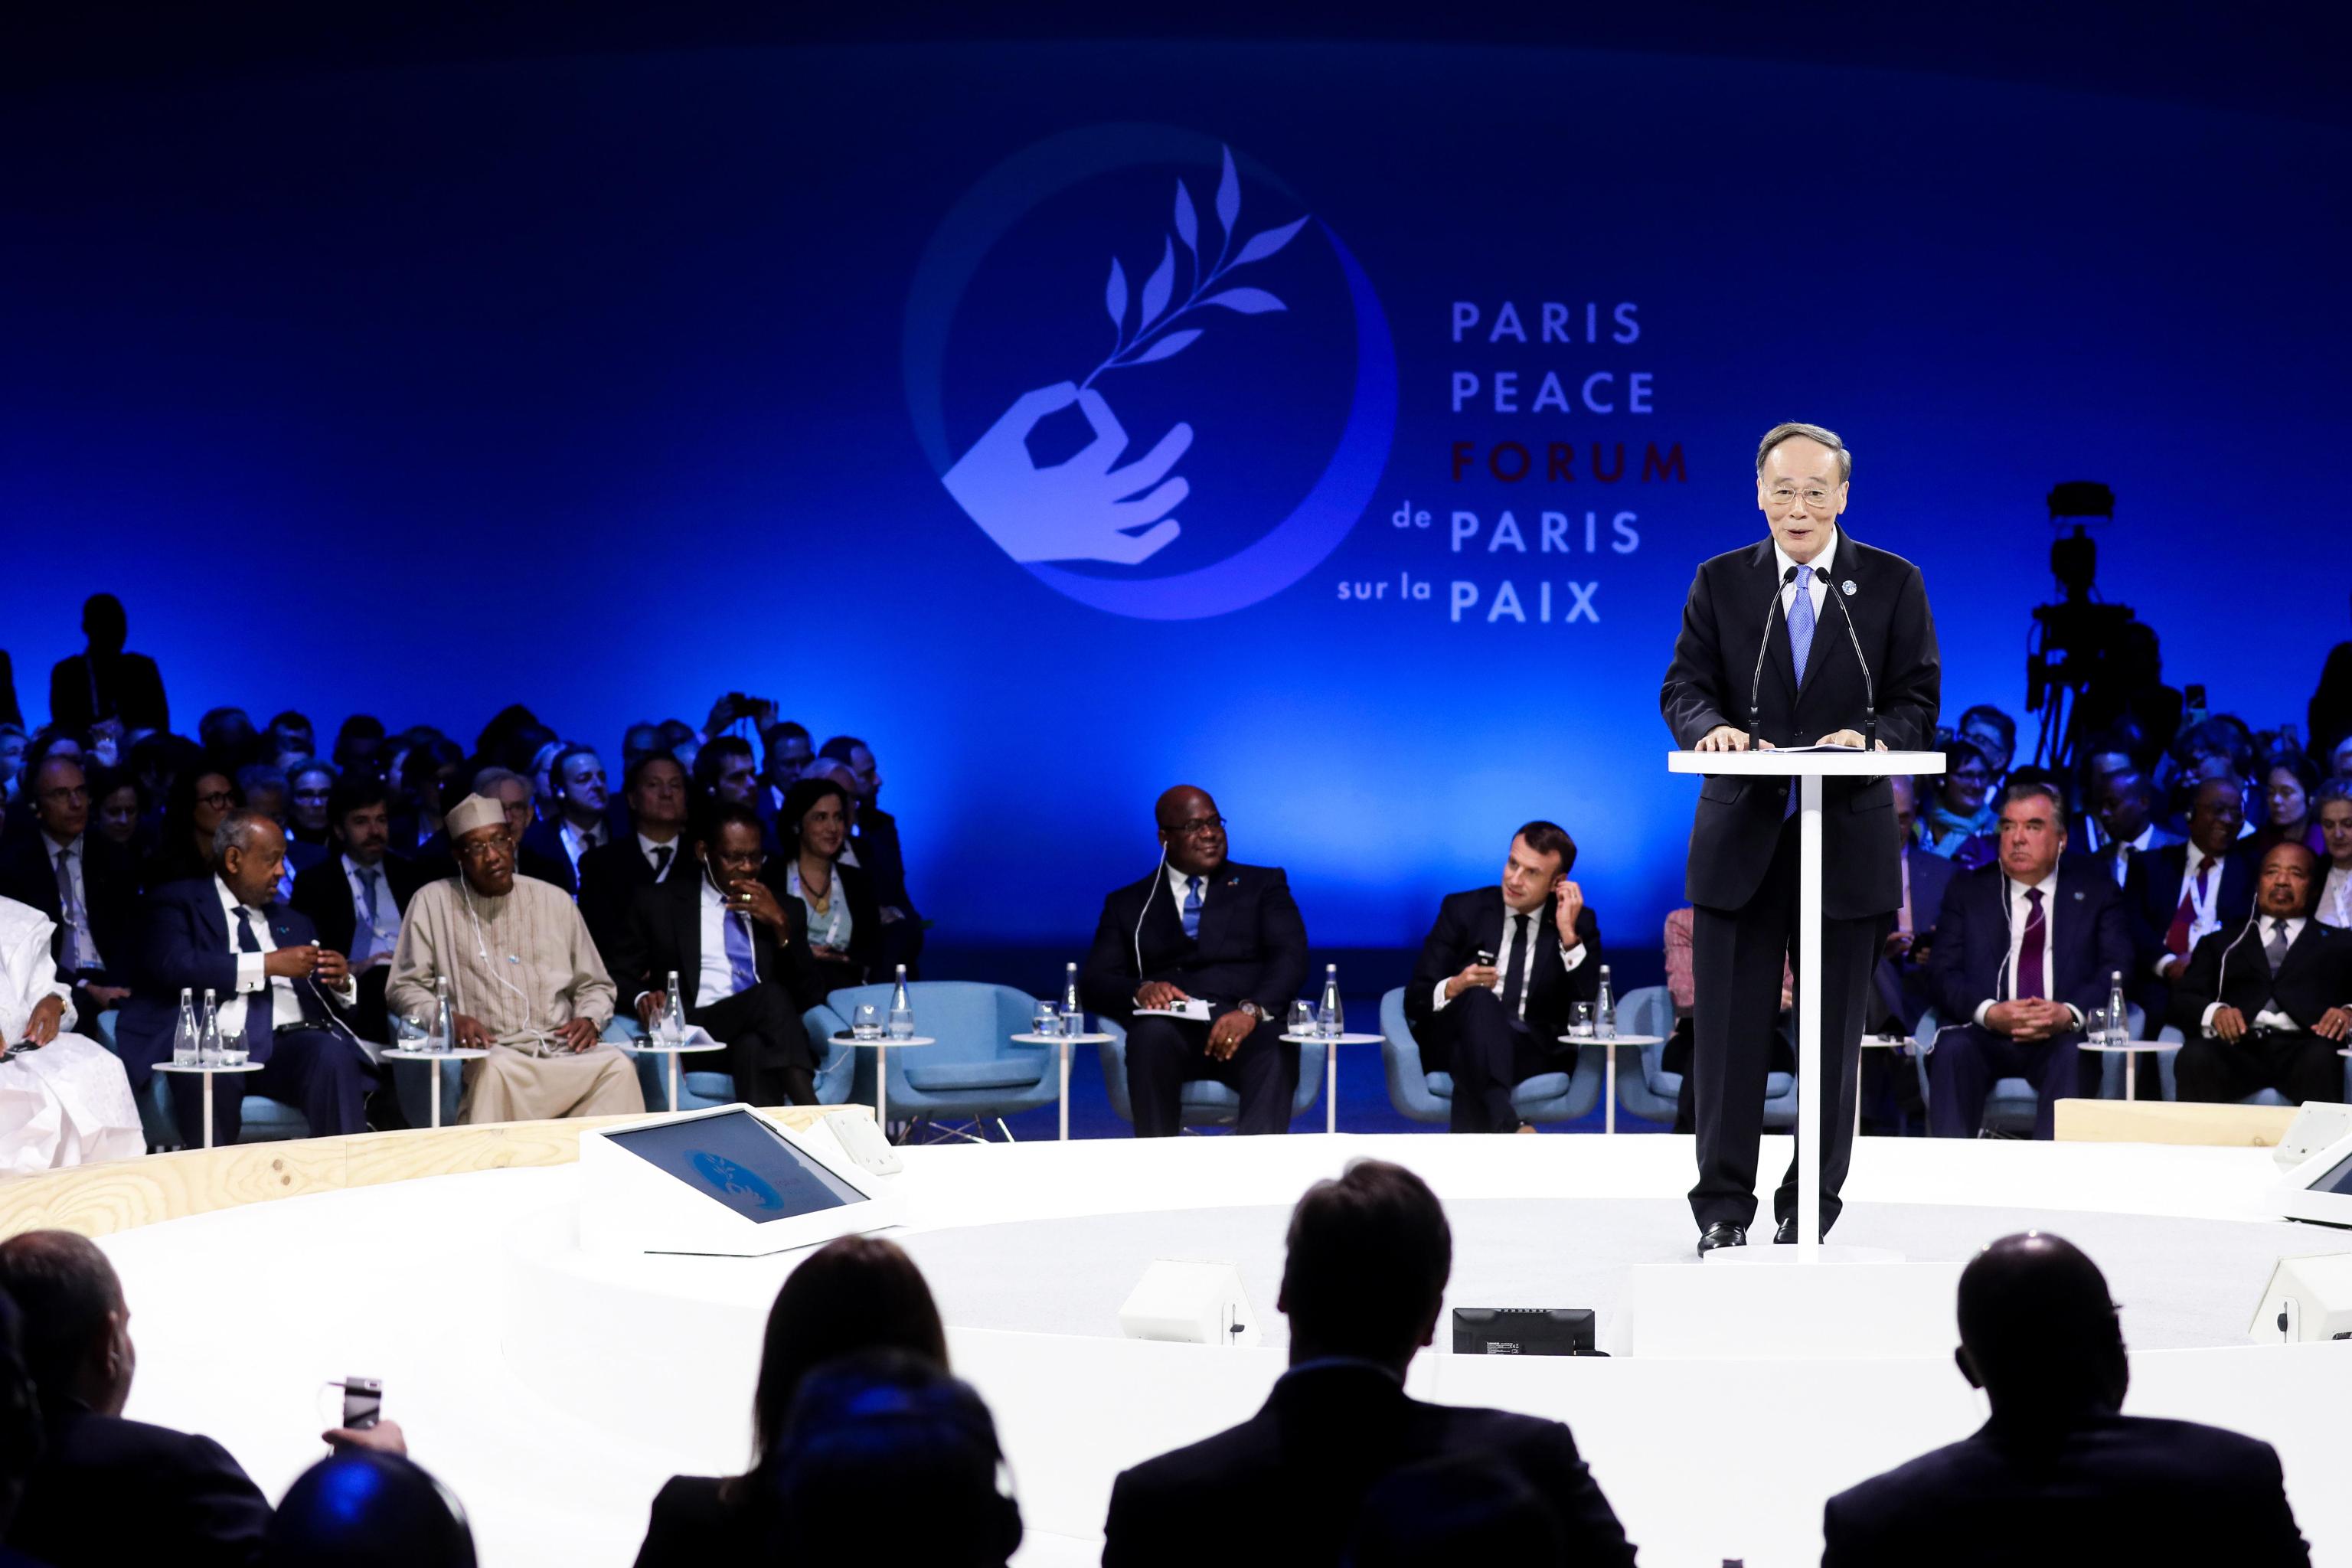 epa07990257 China's Vice President Wang Qishan delivers a speech during the plenary session of the Paris Peace Forum, in Paris, France, 12 November 2019. The international event on global governance issues and multilateralism takes place on 12 to 13 November in Paris.  EPA/LUDOVIC MARIN / POOL MAXPPP OUT